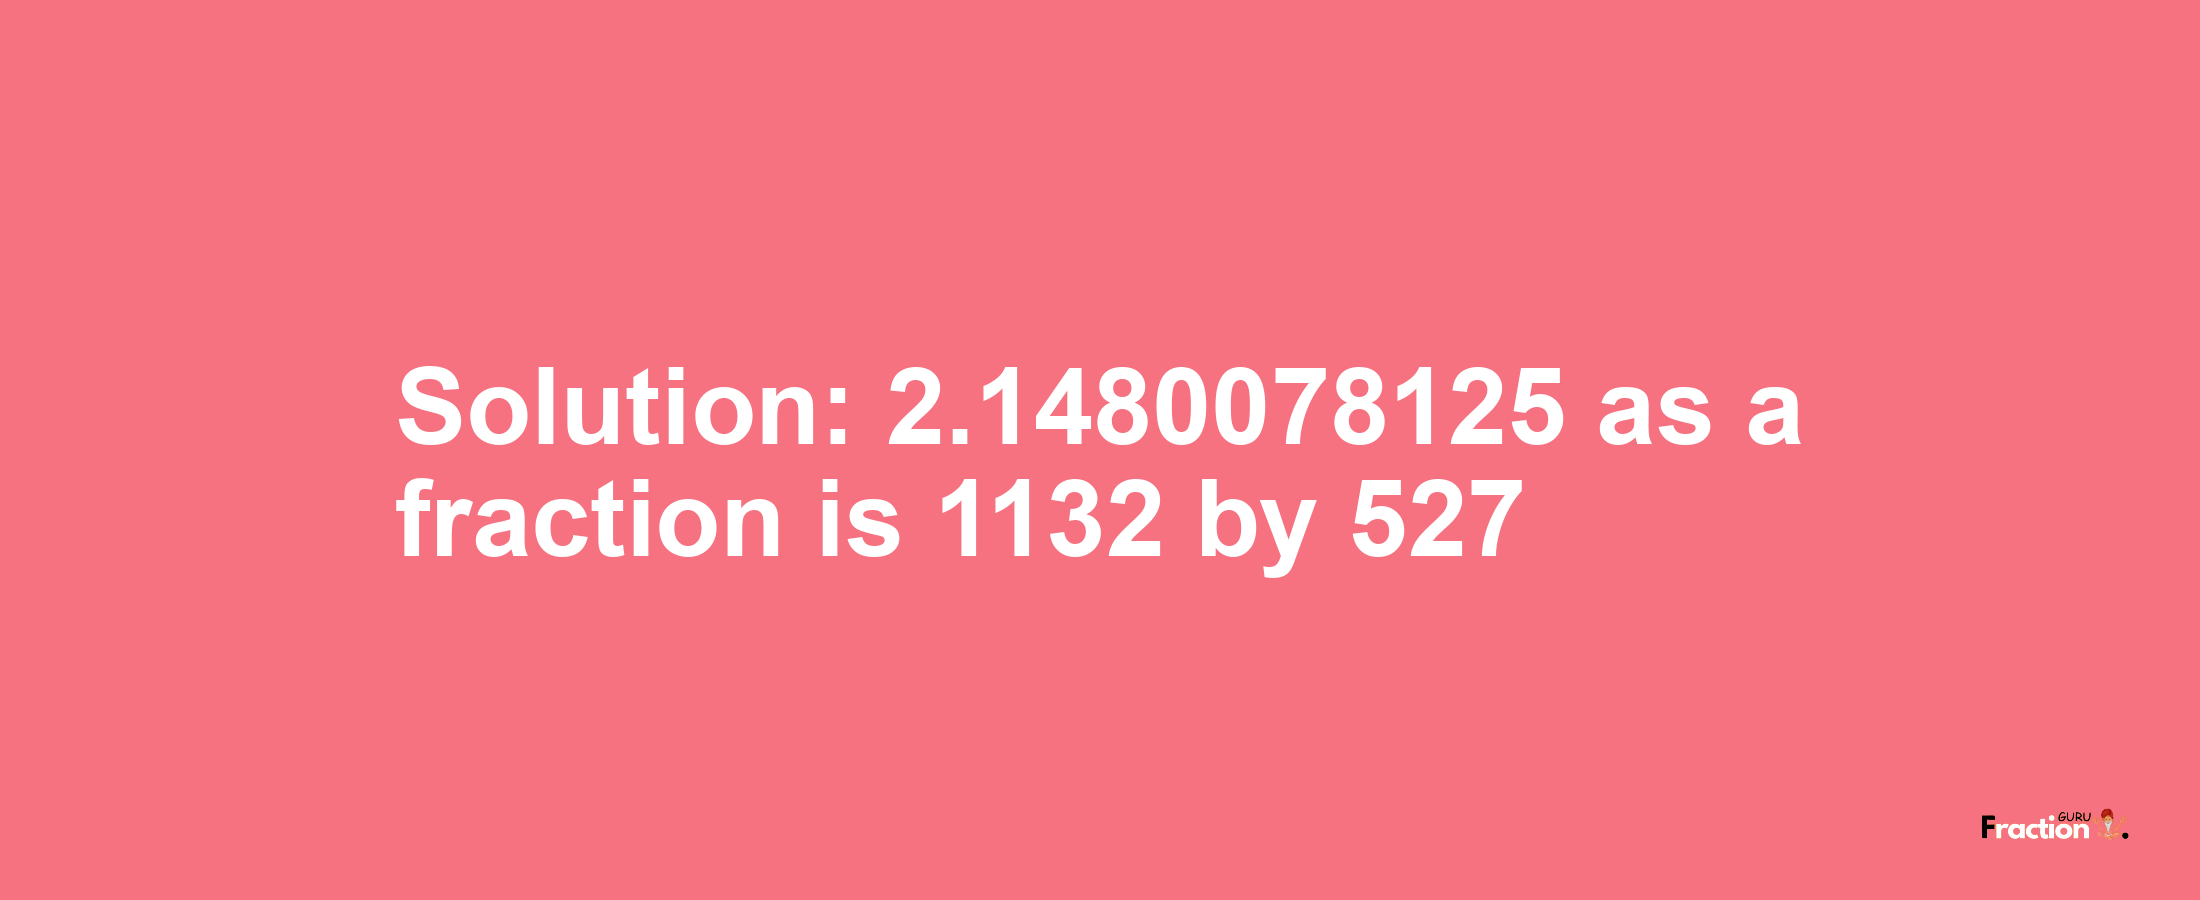 Solution:2.1480078125 as a fraction is 1132/527